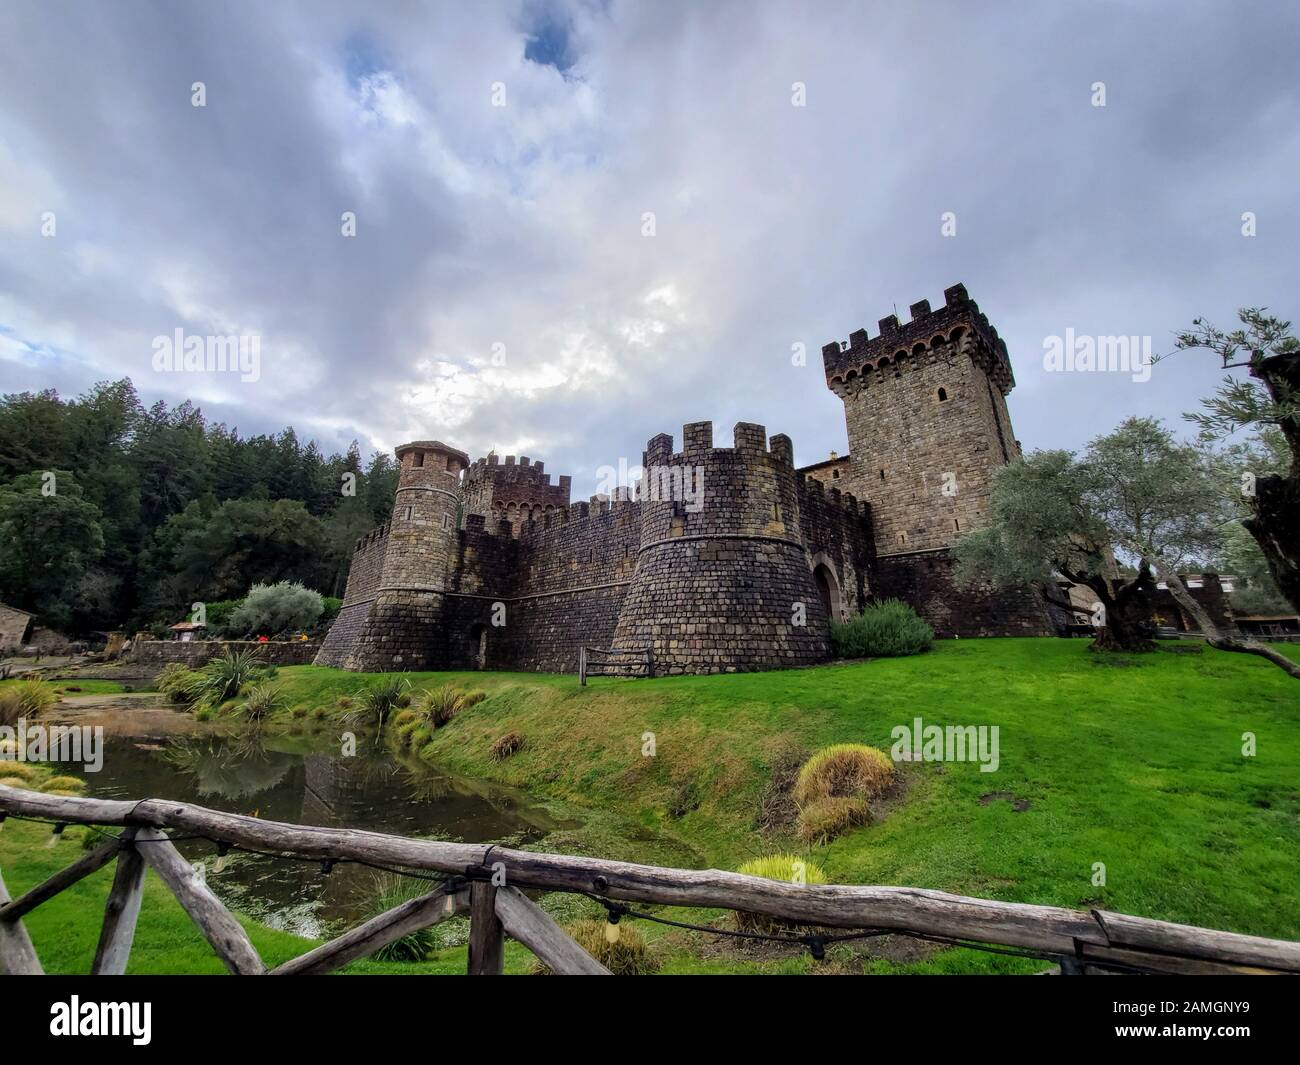 Wide angle view of ramparts at Castello di Amorosa, a vineyard in the Calistoga AVA of the Napa Valley in the California Wine Country, housed in a large reconstruction of a Tuscan castle, Calistoga, California, December 22, 2019. Castello di Amorosa is a popular tourist destination for visitors to the Napa Valley. () Stock Photo